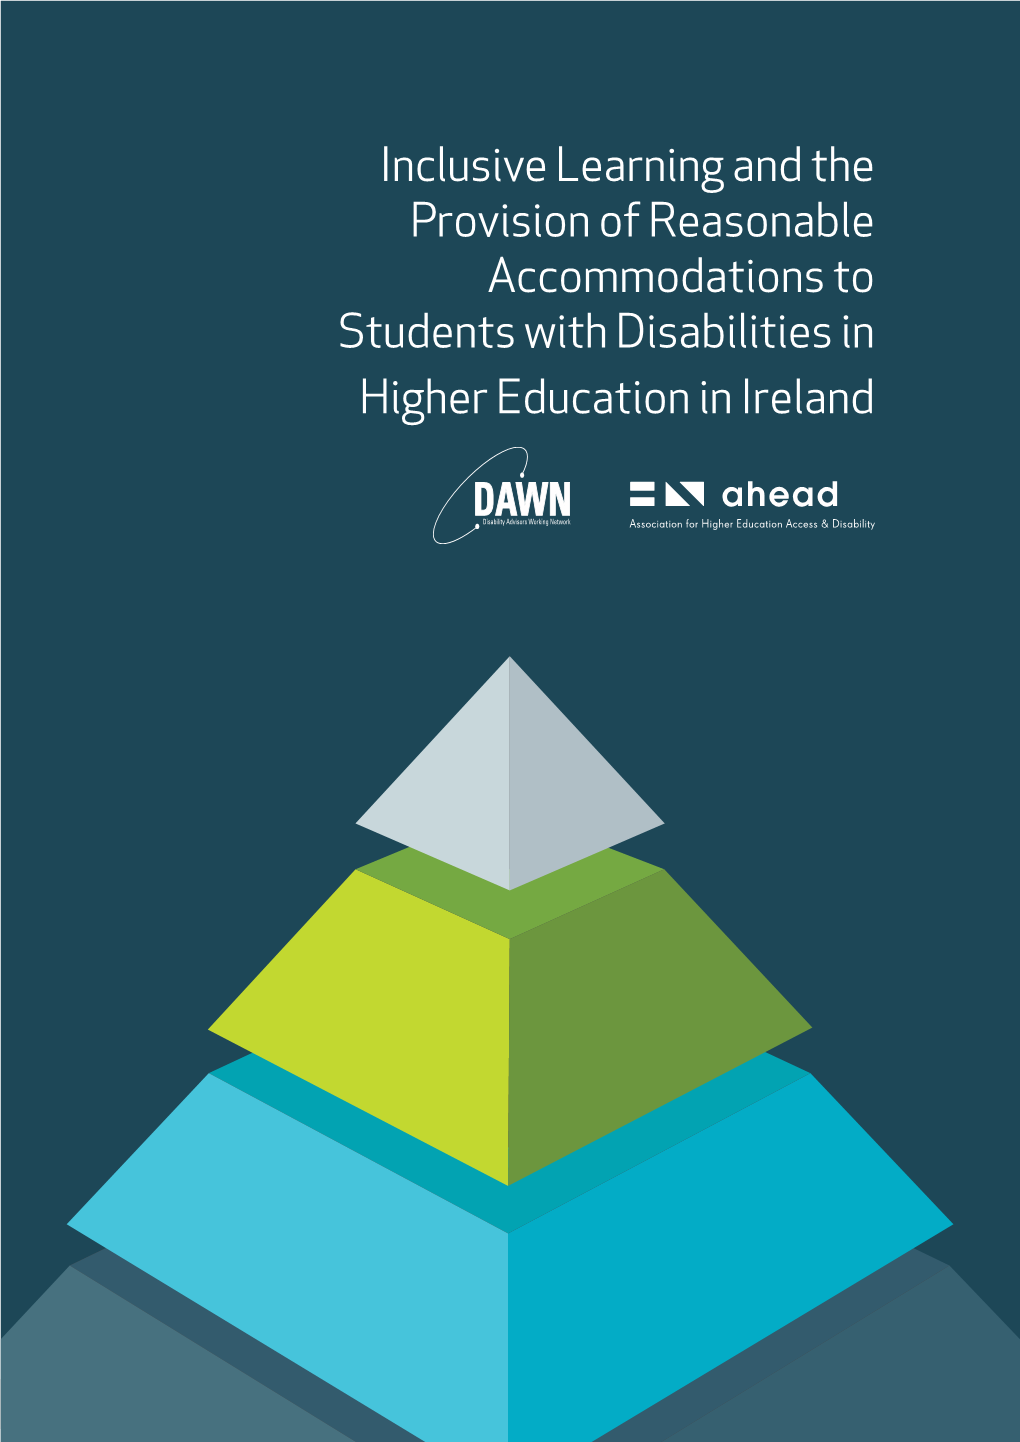 Inclusive Learning and the Provision of Reasonable Accommodations to Students with Disabilities in Higher Education in Ireland